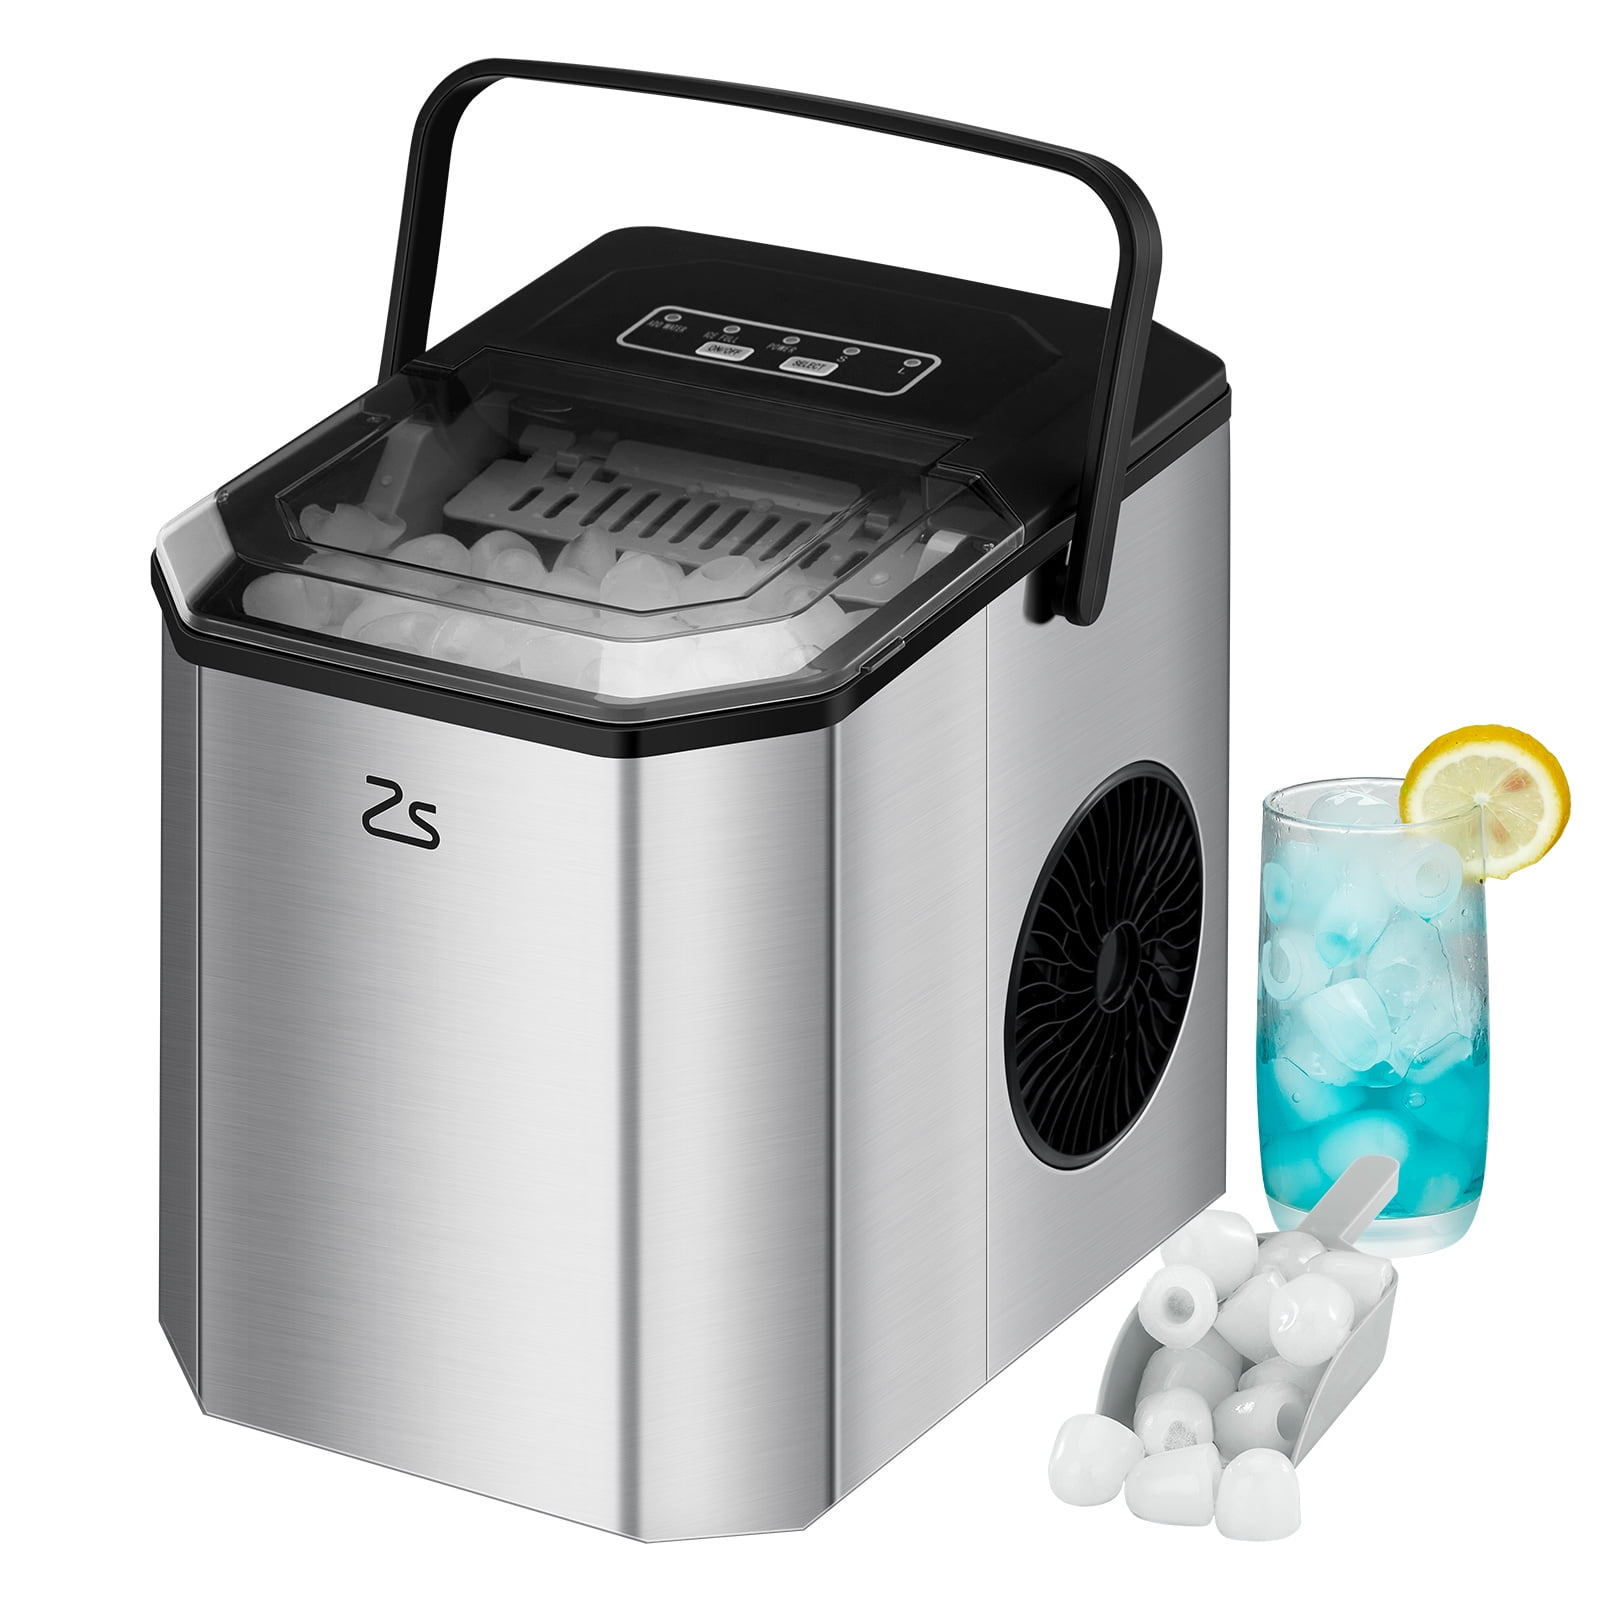 Nugget Ice Maker, Zstar Countertop Ice Maker, Stainless Steel